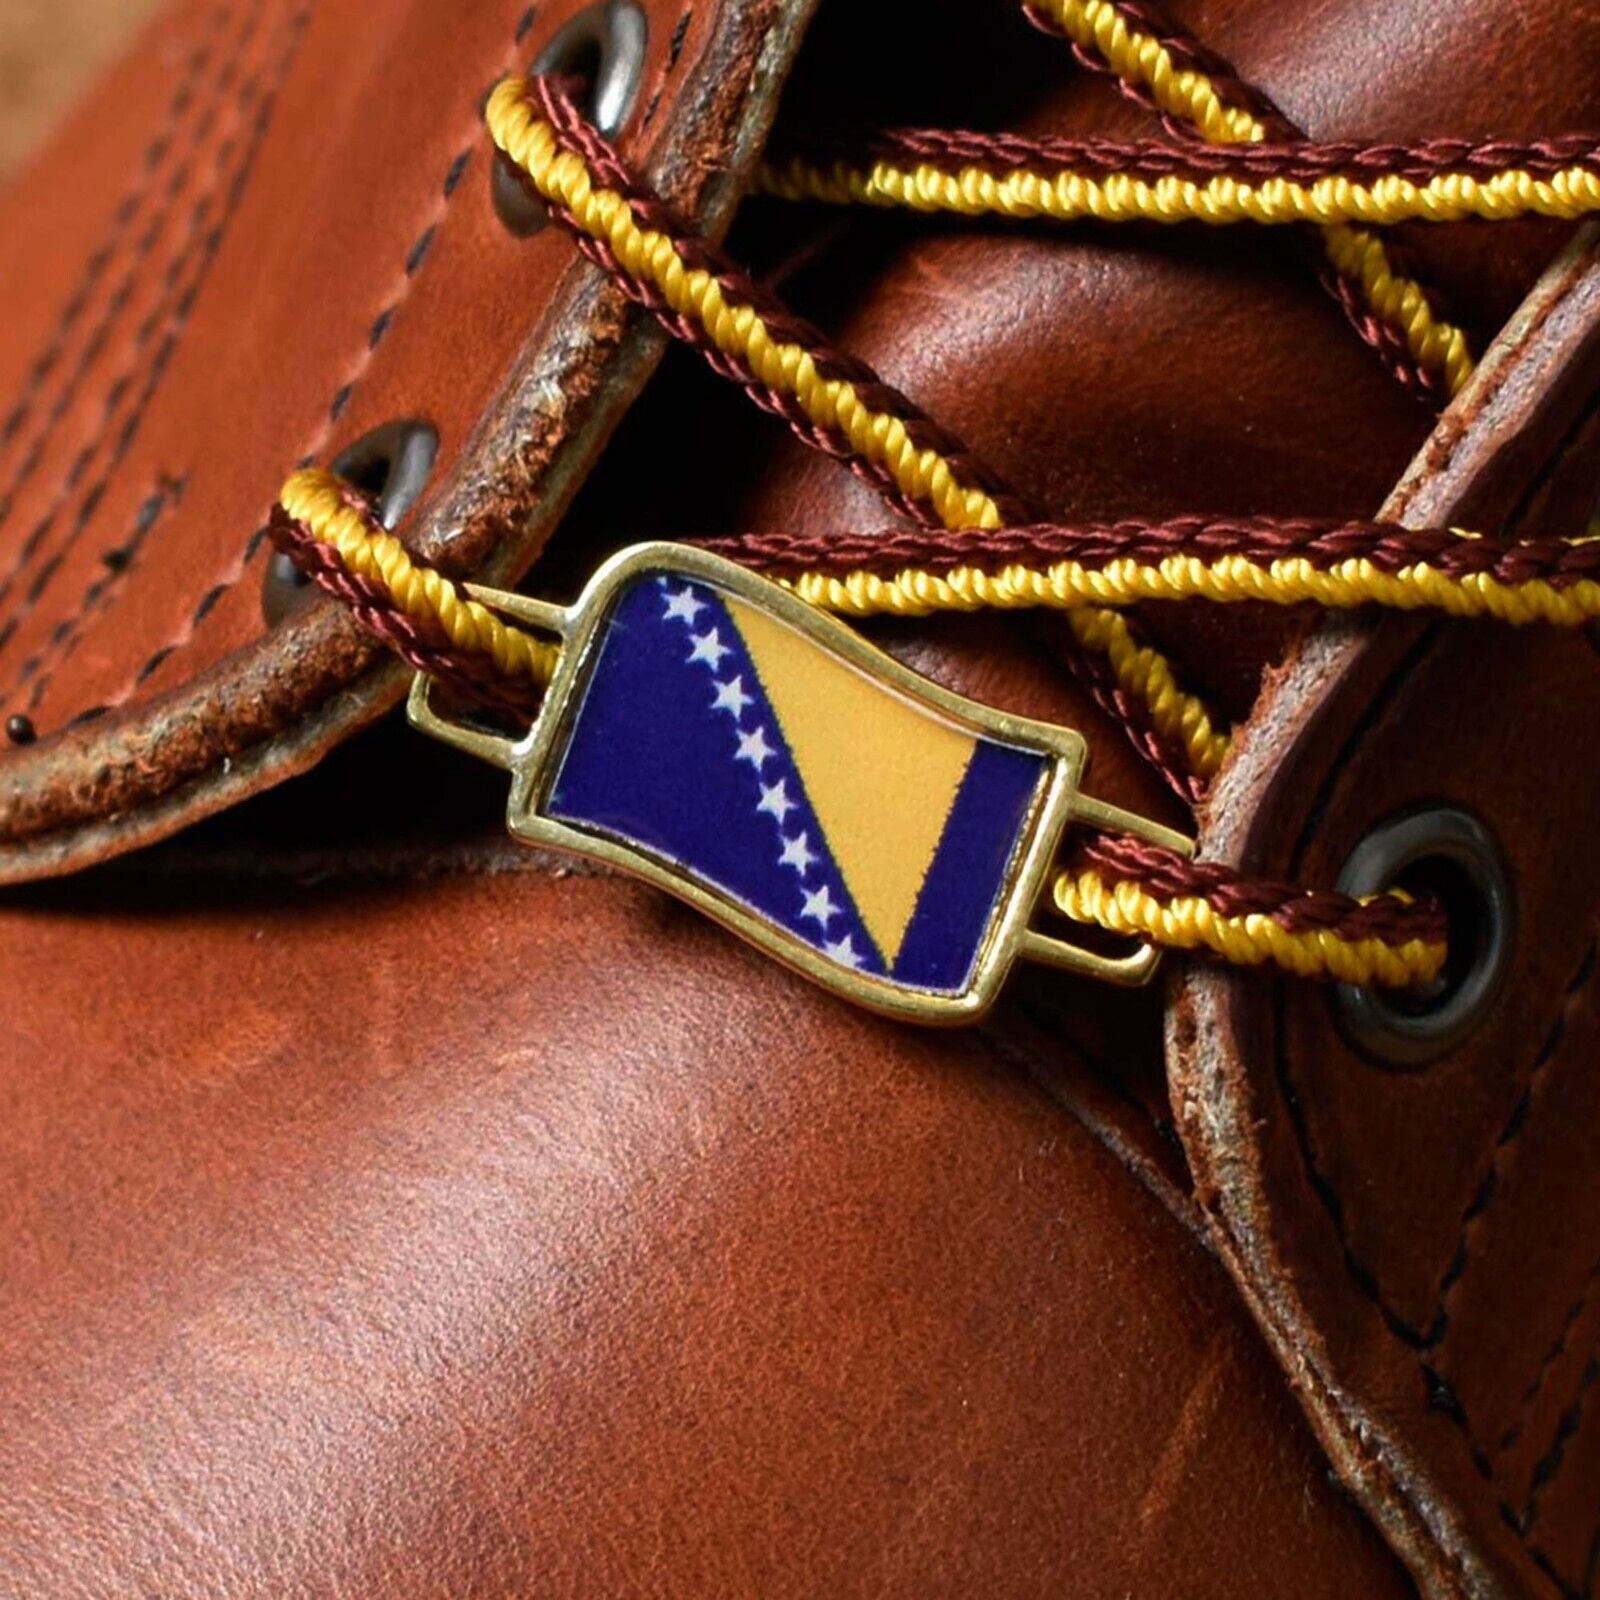 Bosnia and Herzegovina Flags Shoes Boot Shoelace Keeper Holder Charm BrooklynMaker